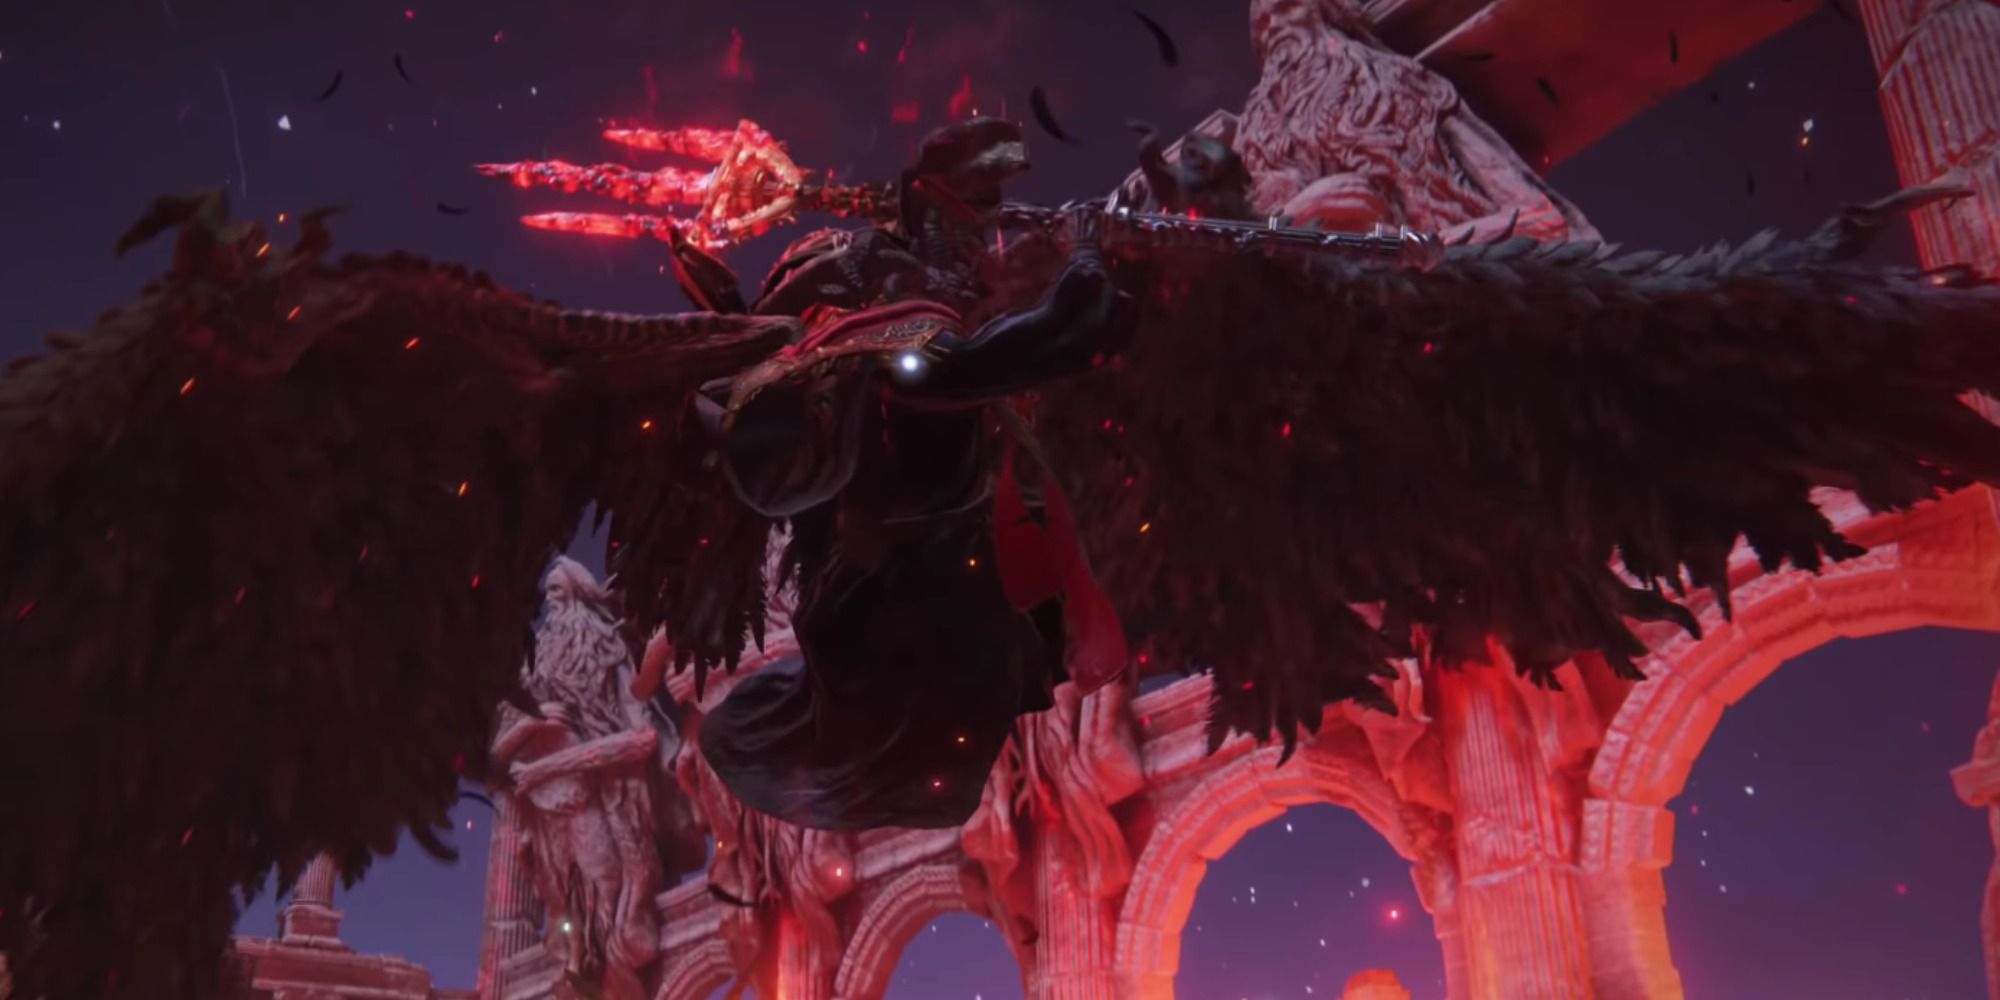 Mohg, Lord of Blood, performing a winged strike attack in Elden Ring